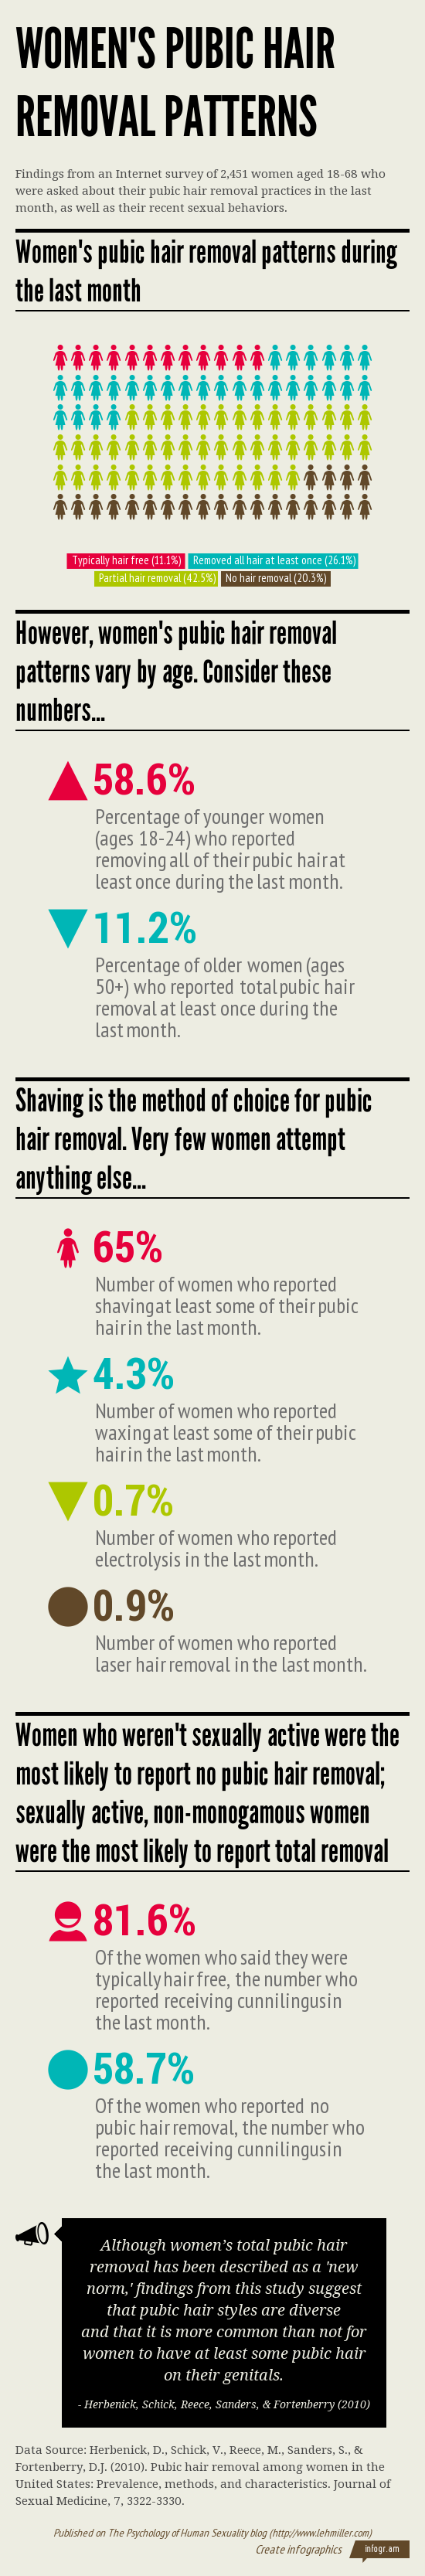 Women's Pubic Hair Removal Patterns (Infographic) - Sex and Psychology